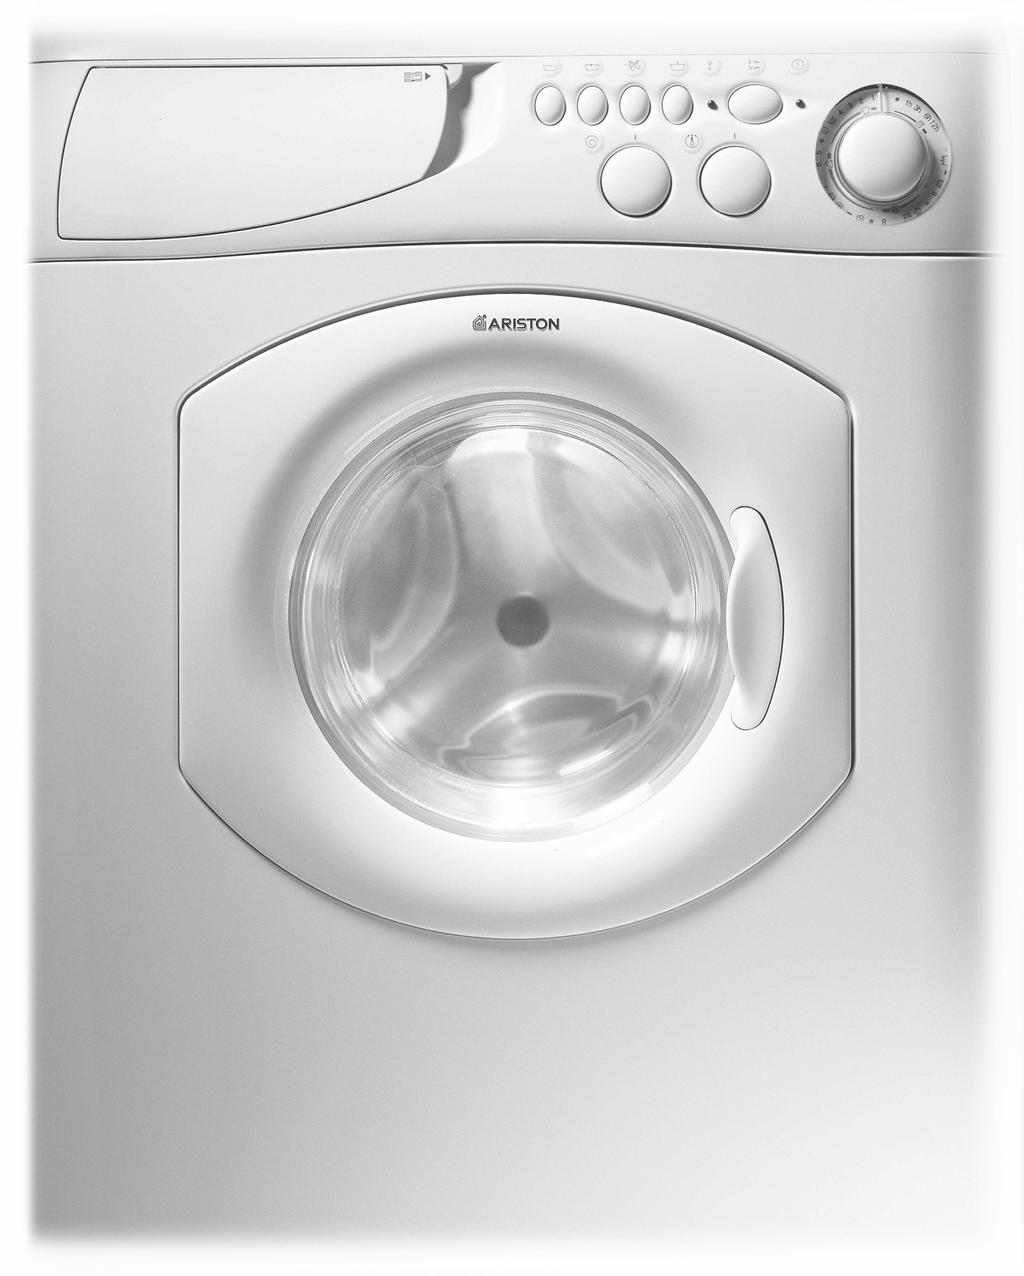 The secrets of fabrics How to get better results Washer-dryer safe and easy to use AWD 129 Instructions for installation and use NA Instrucciones para la instalación y el uso